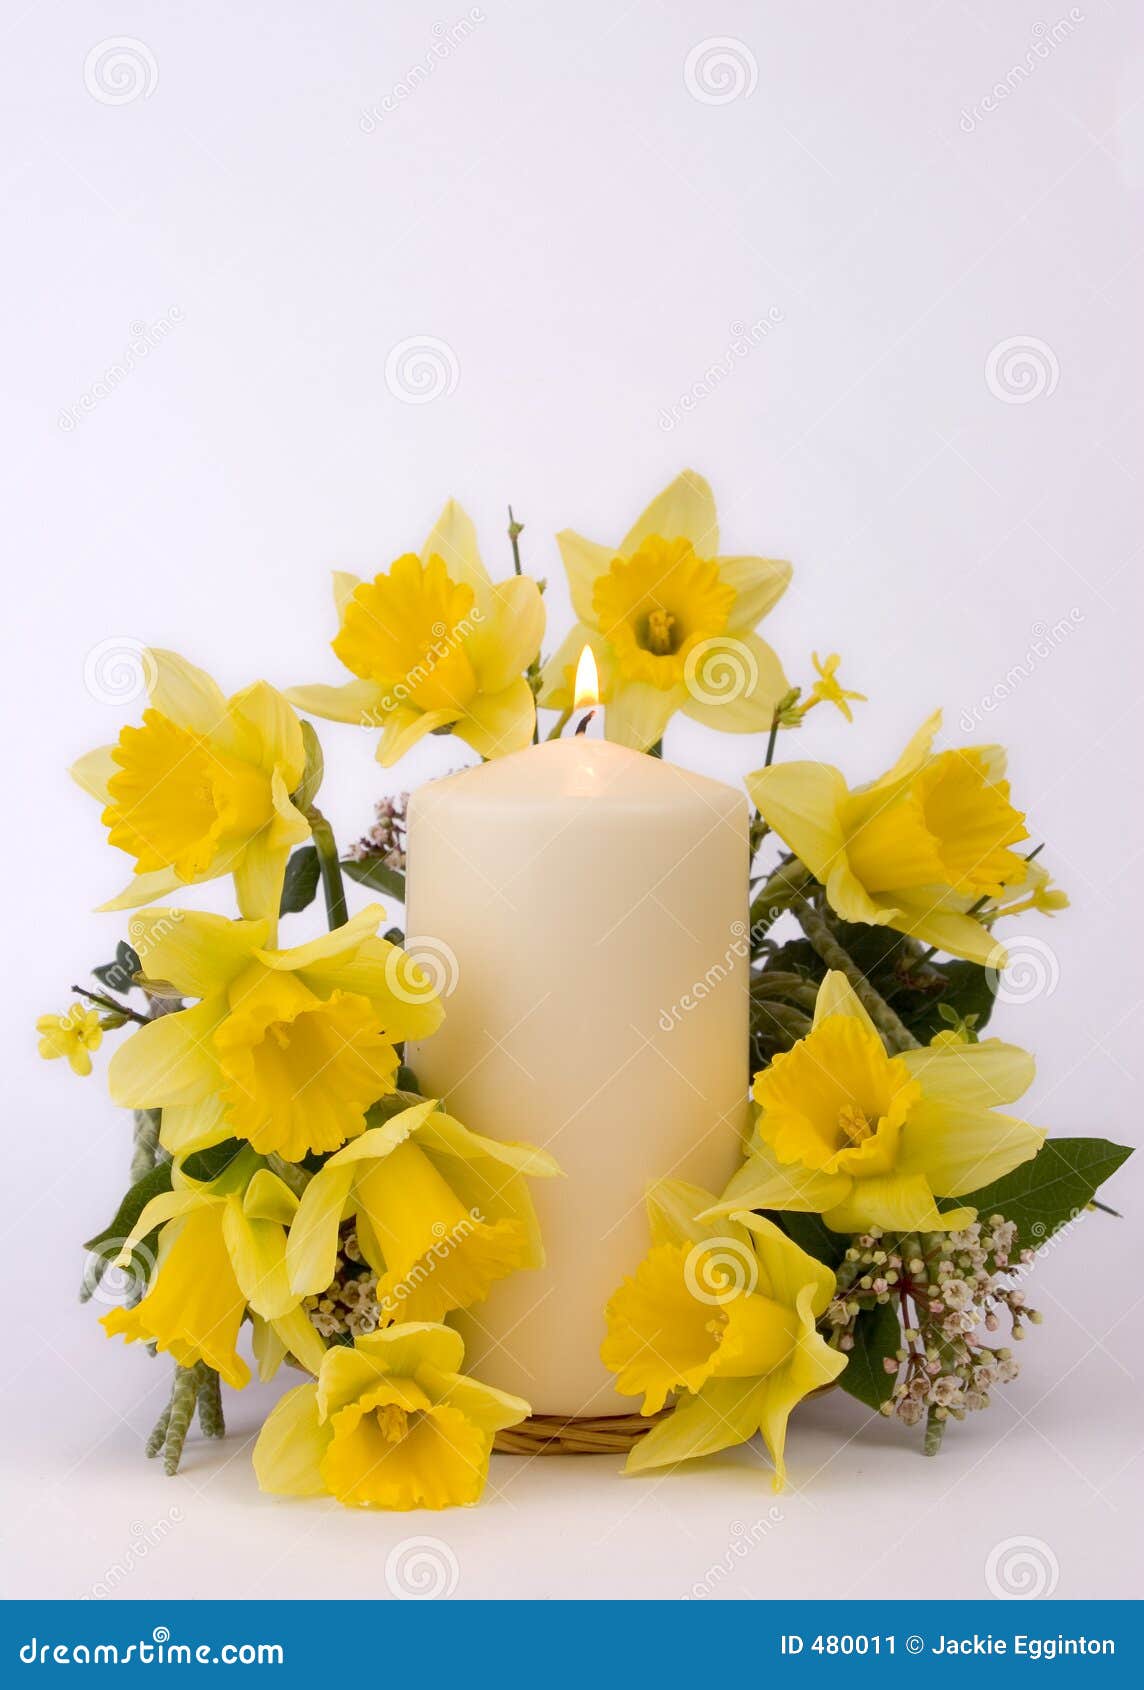 clipart easter candle - photo #41